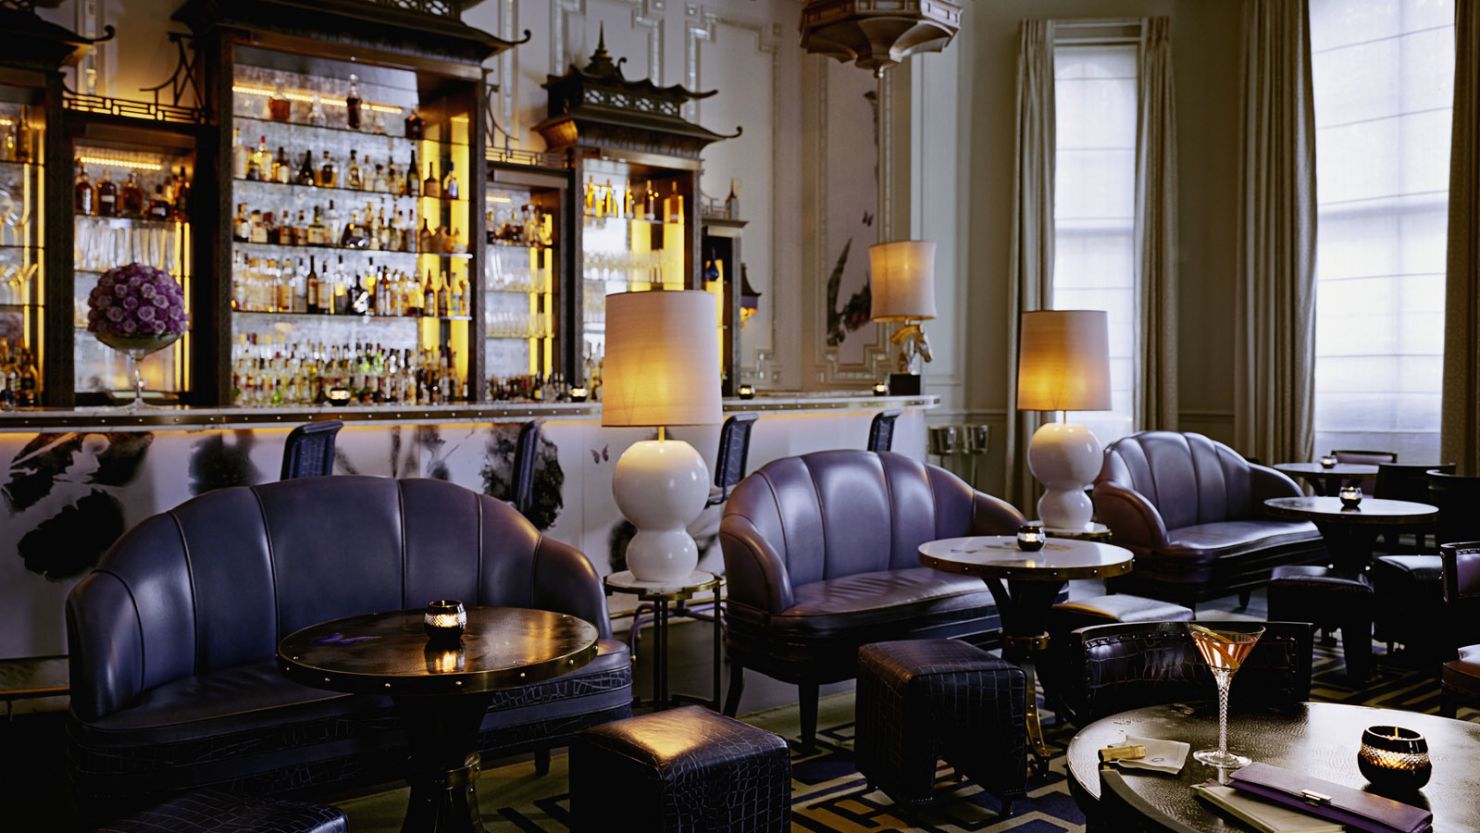 Behold the best bar in the world for 2014 -- The Artesian in London.